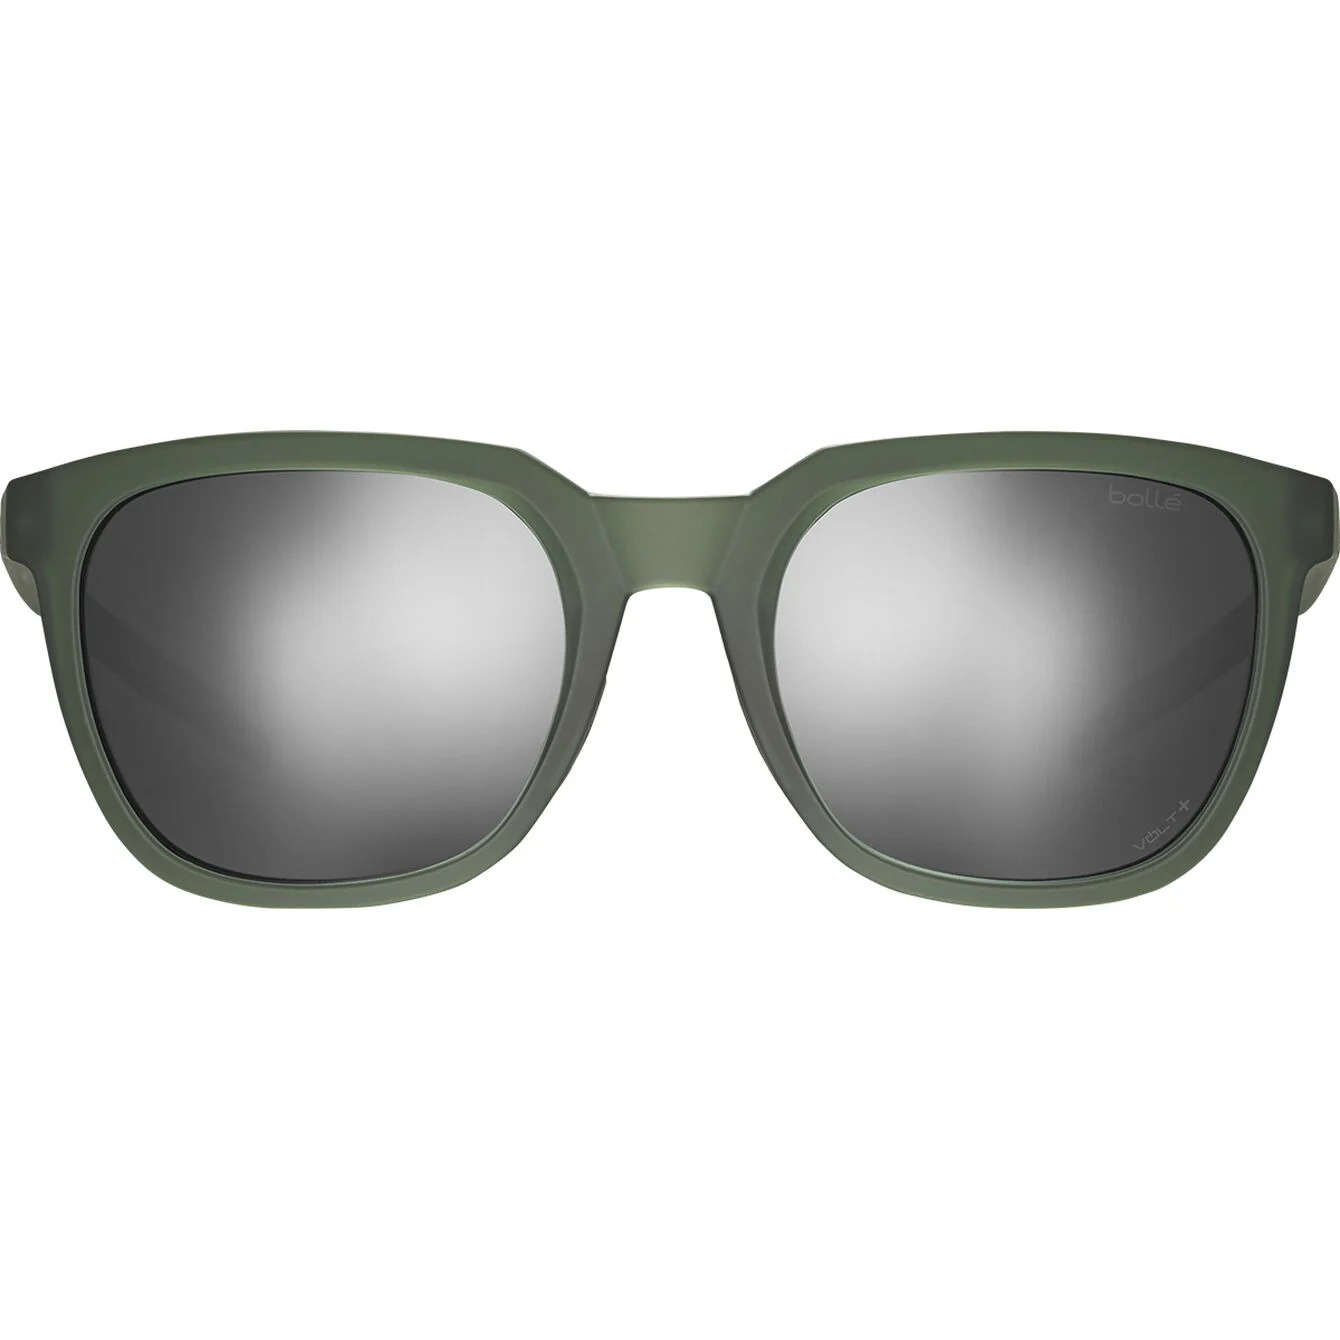 Очки солнцезащитные Bolle TALENT Forest Crystal Matte-Volt+Cold White Polarized